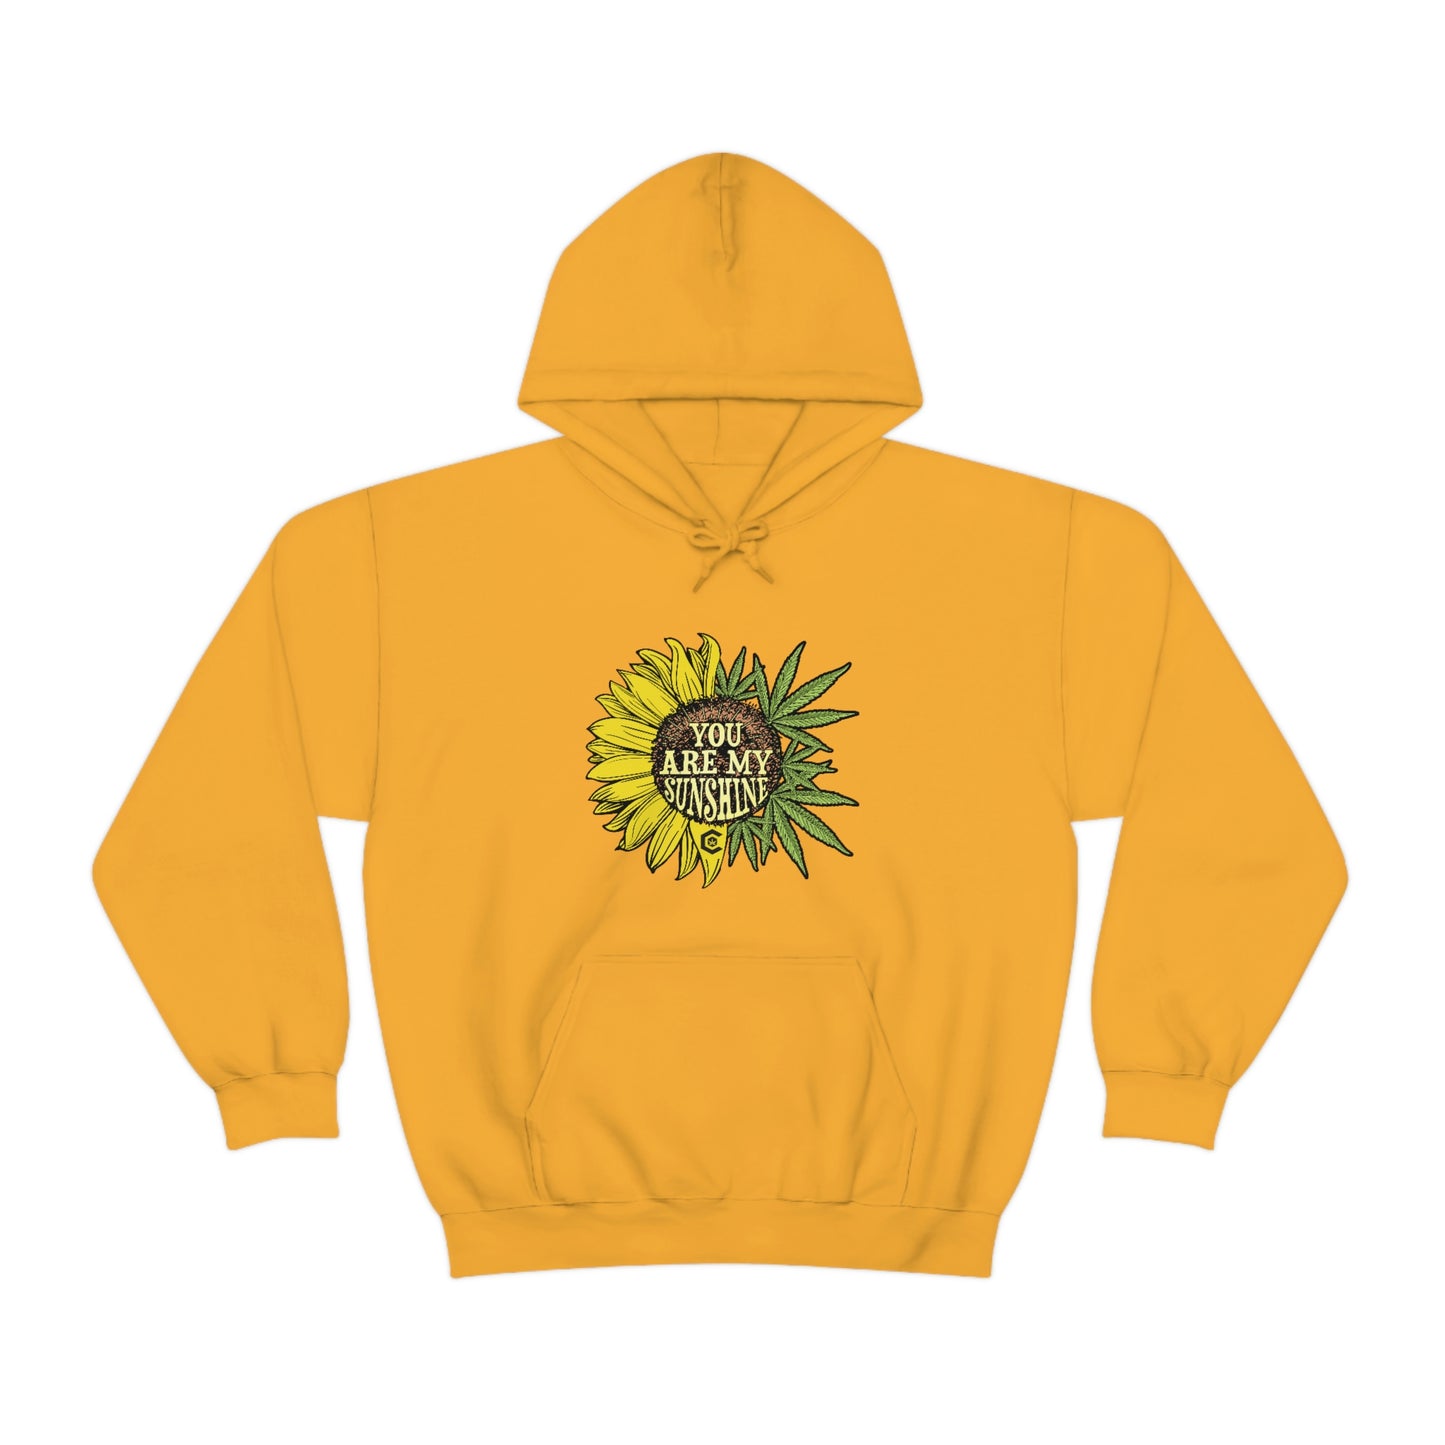 a yellow hoodie with a "You Are My Sunshine Cannabis Sweatshirt" design.